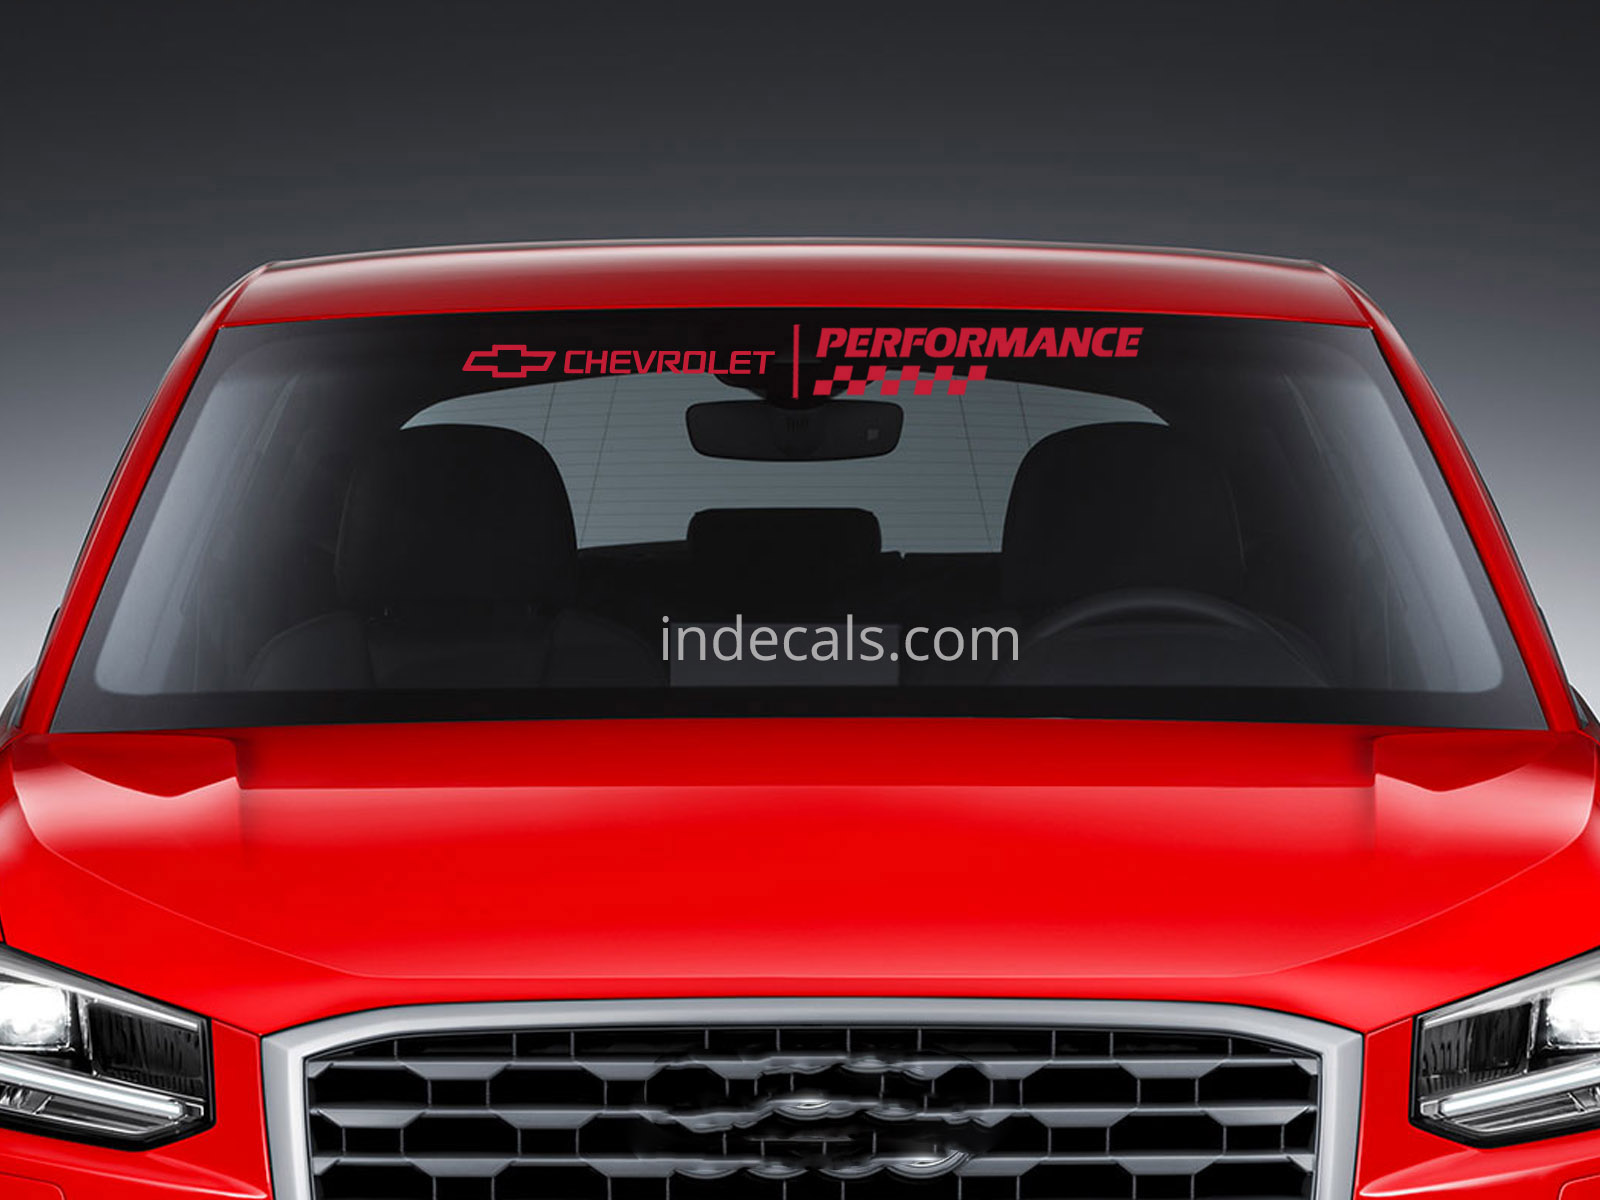 1 x Chevrolet Performance Sticker for Windshield or Back Window - Red